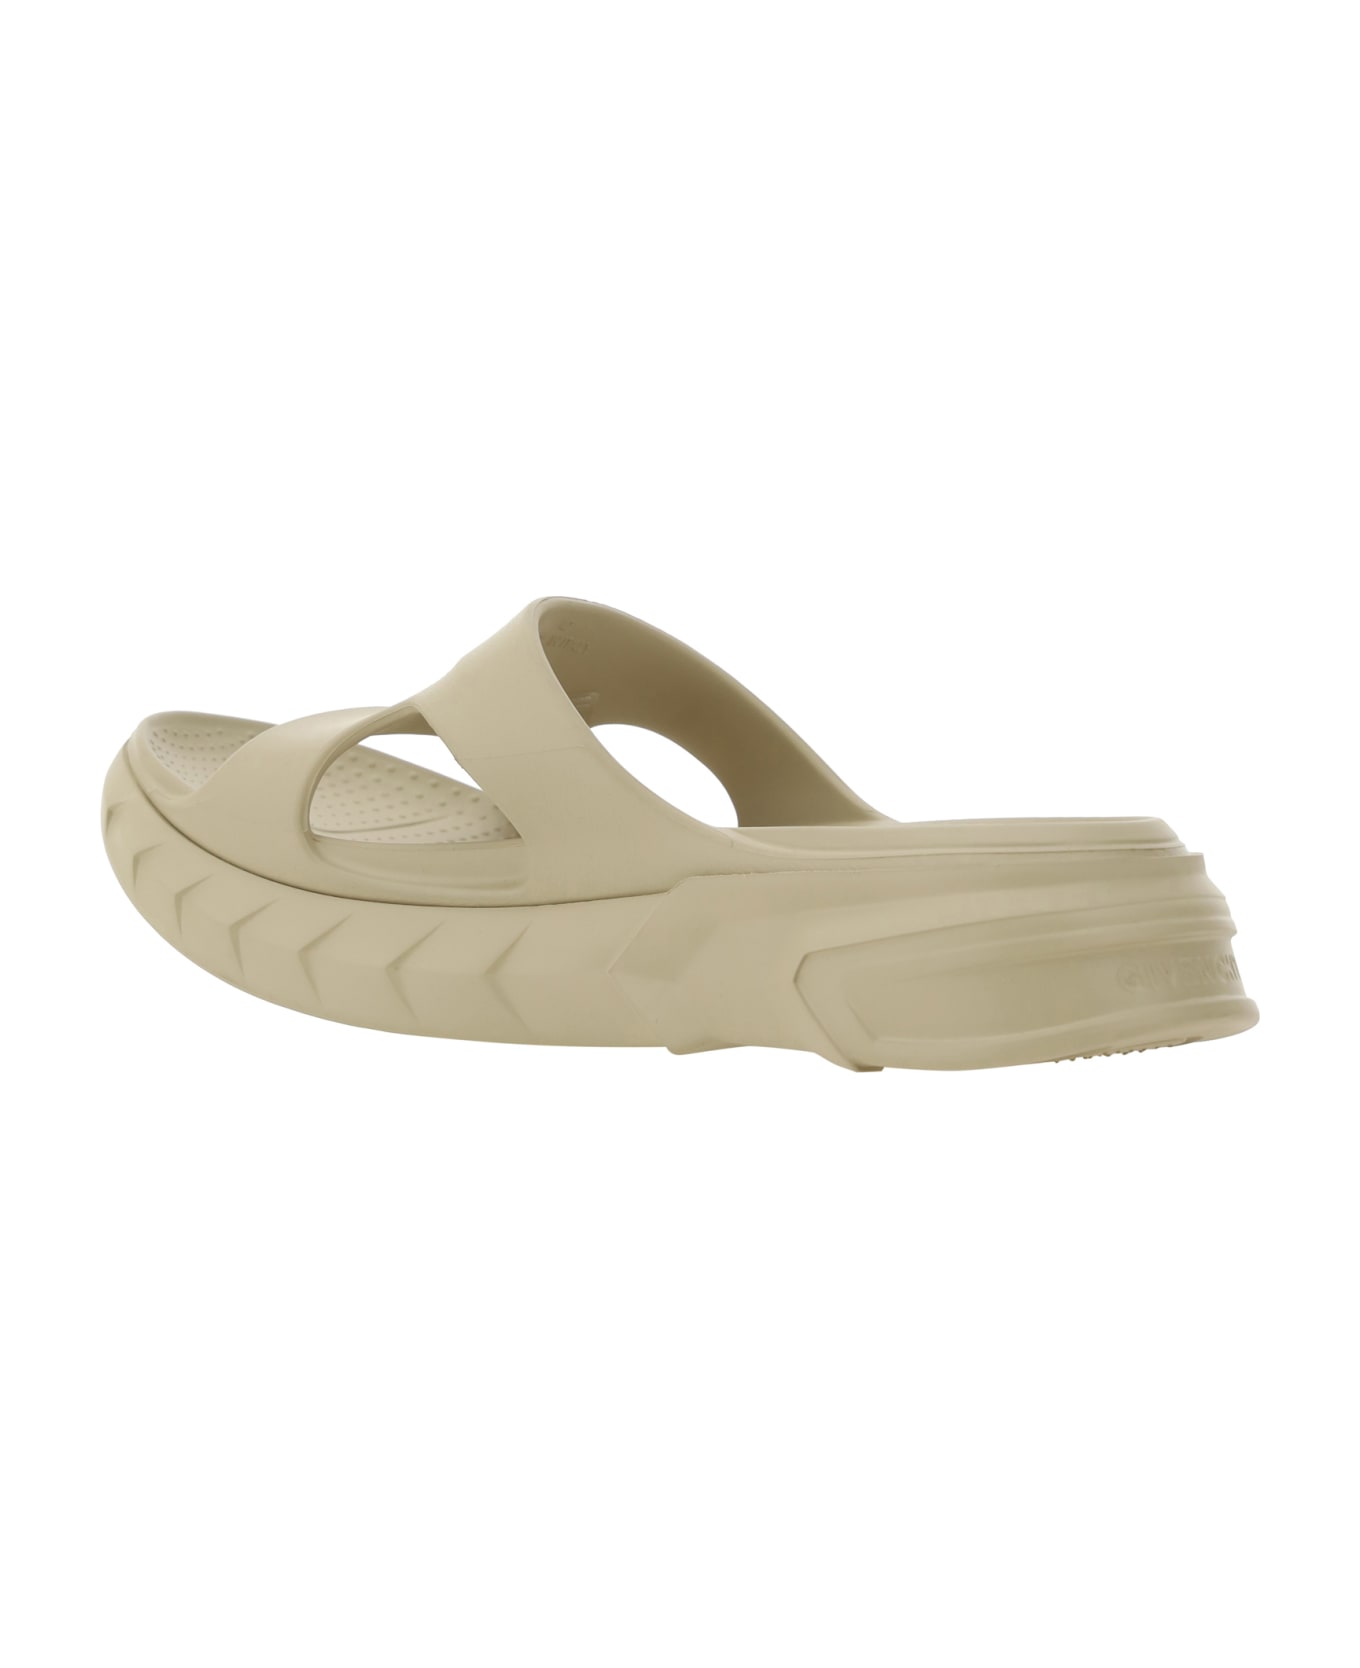 Givenchy Marshmallow Sandals - Beige